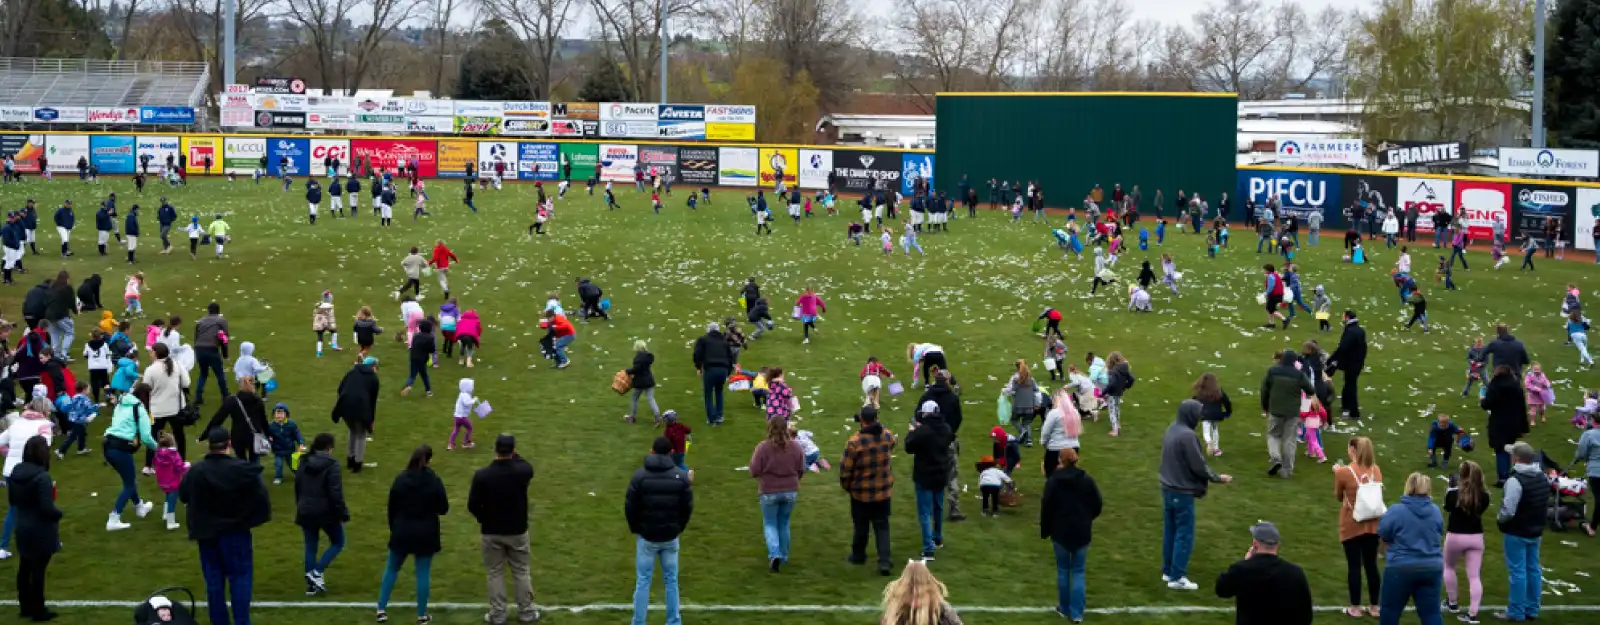 lots of people on a baseball field looking for easter eggs